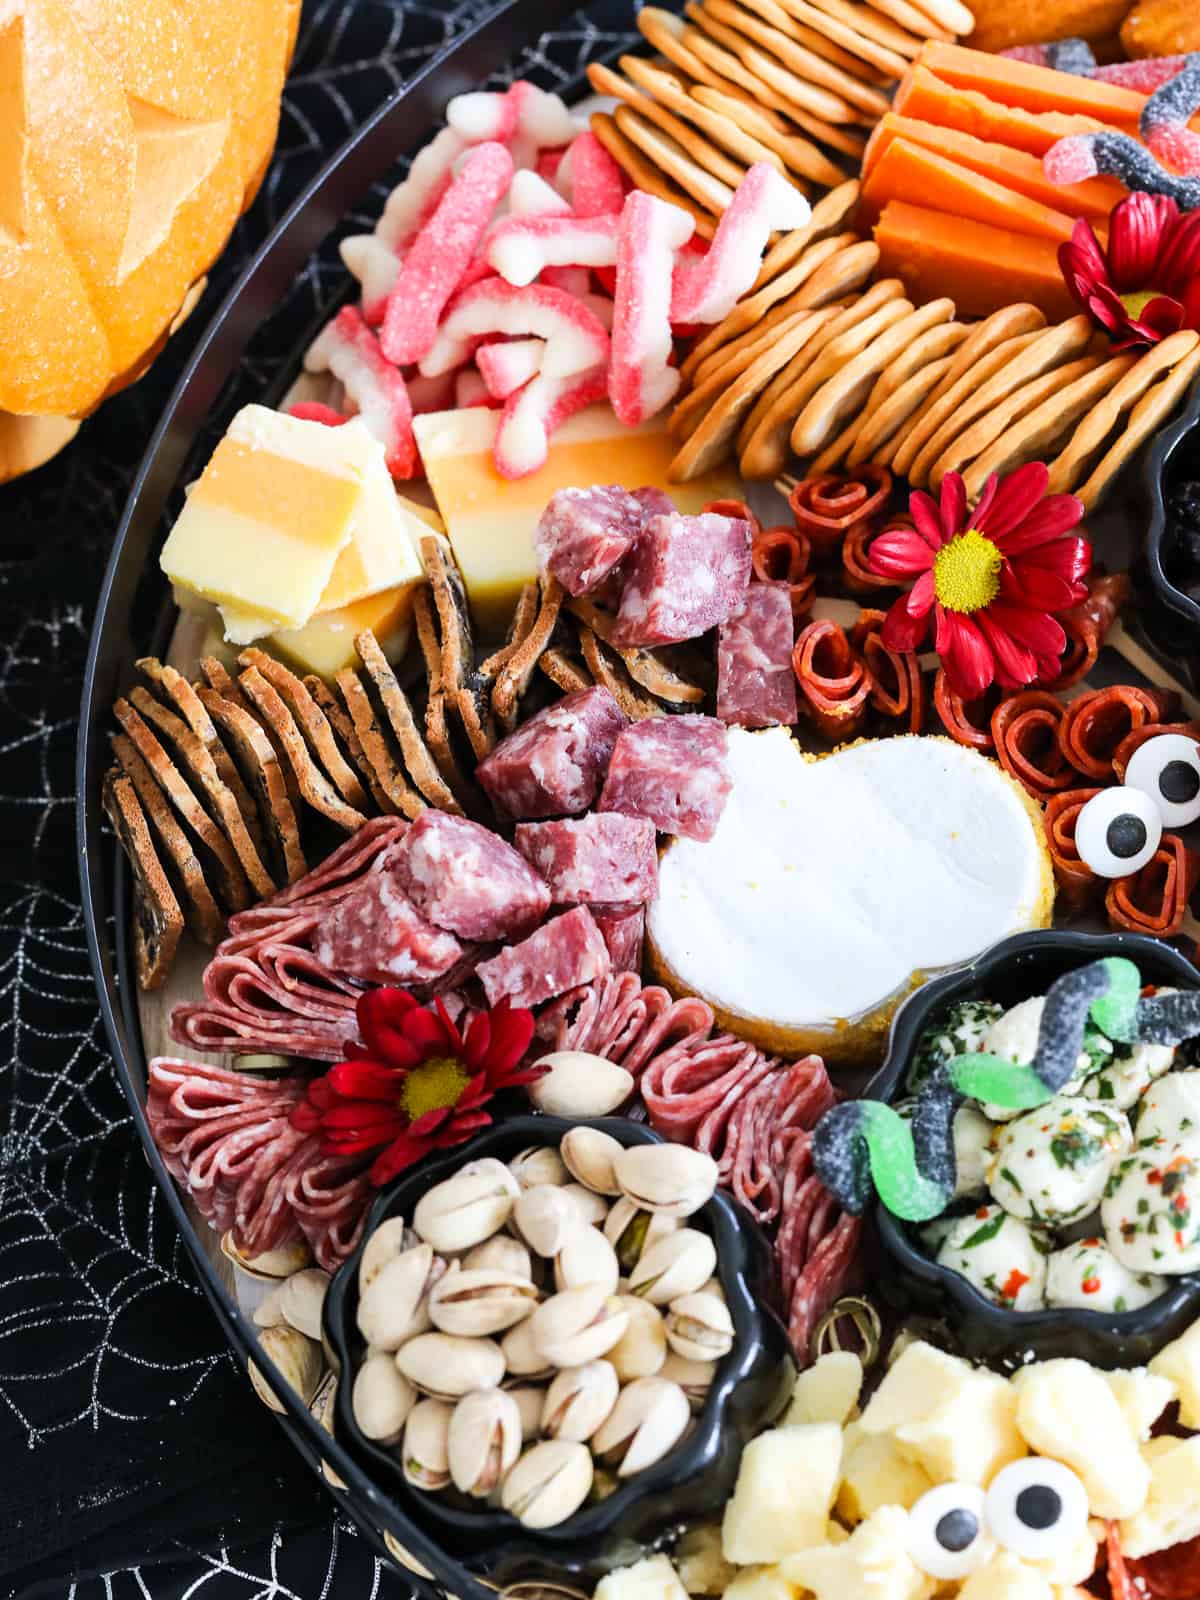 Looking down on a Halloween charcuterie board with pumpkin shaped brie cheese, stacks of crackers, sliced cheeses, nuts, and spooky Halloween candy.